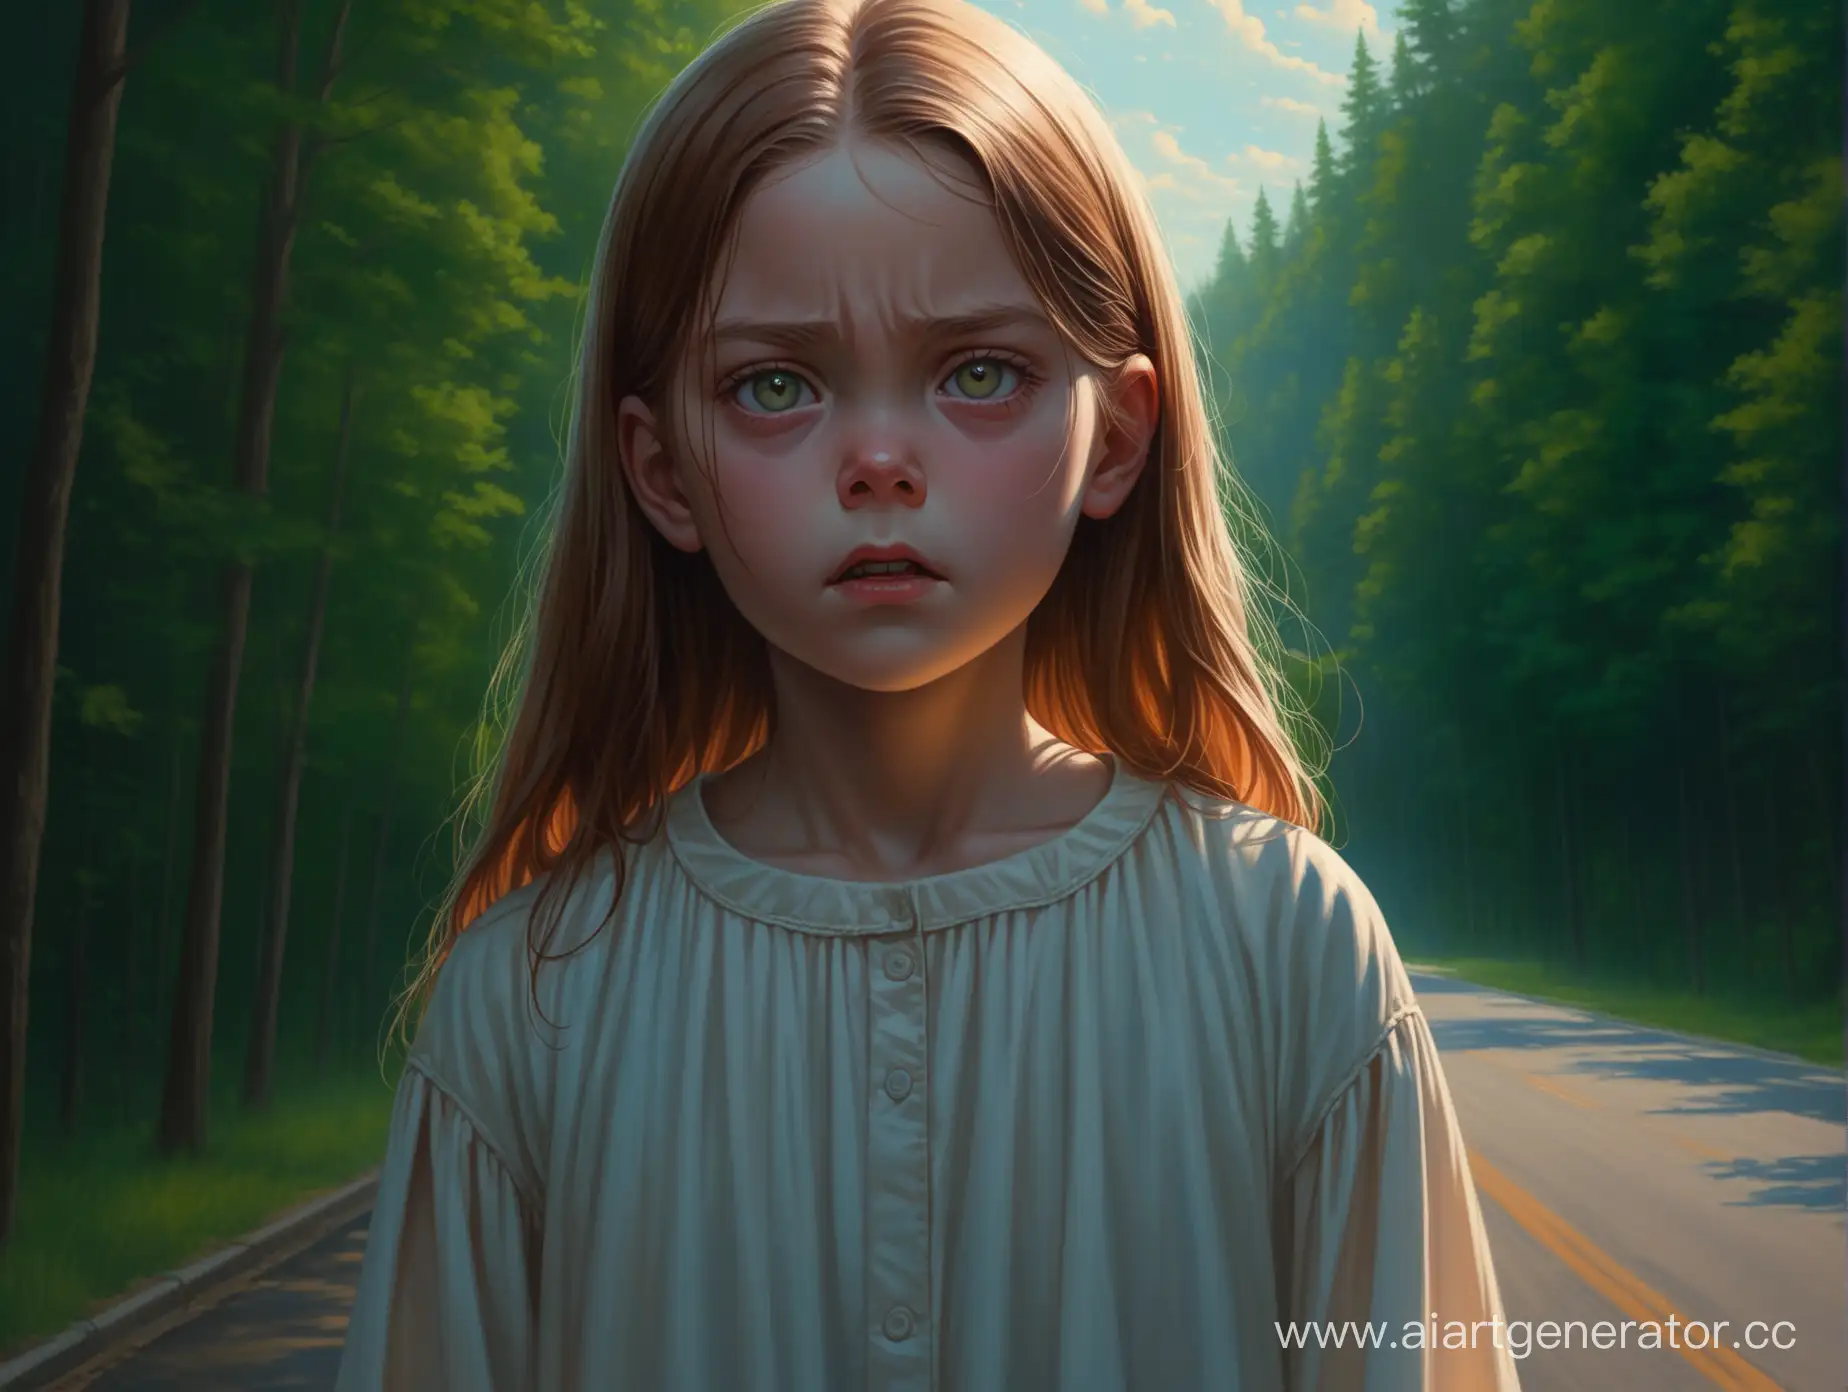 Gentle-Natured-Girl-in-a-Difficult-Childhood-Carrie-White-Tribute-Art